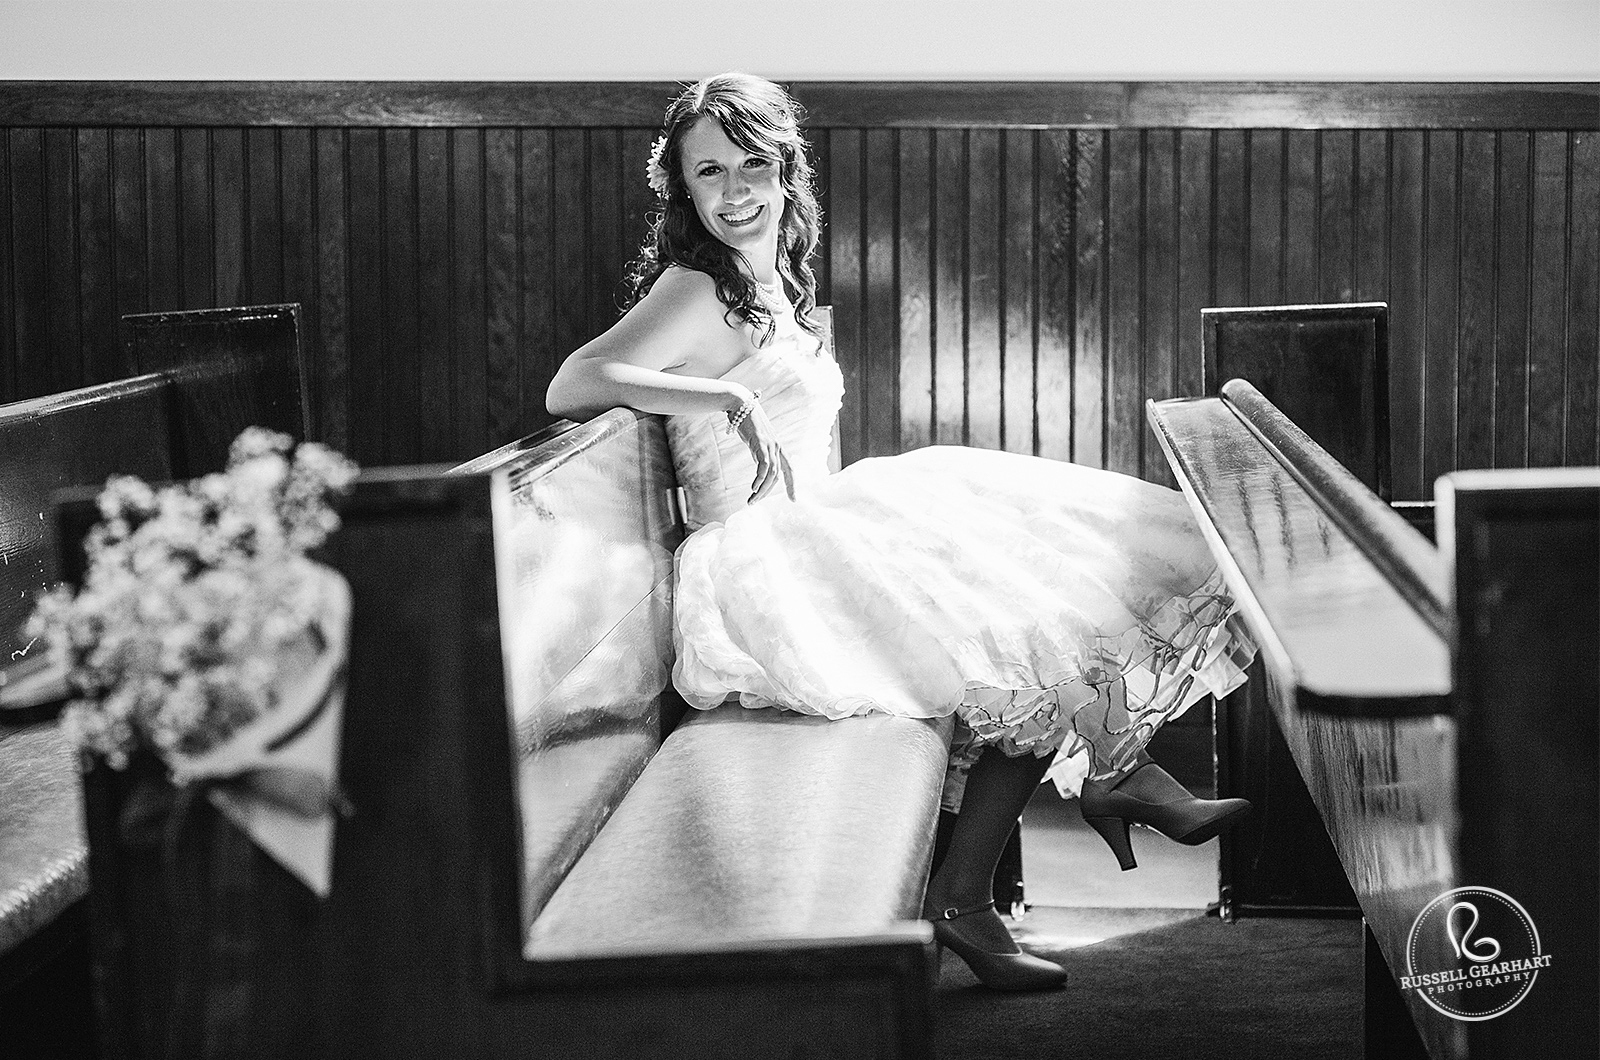 Bridal Portrait – Knott’s Berry Farm Church of Reflections Wedding – Russell Gearhart Photography – www.gearhartphoto.com